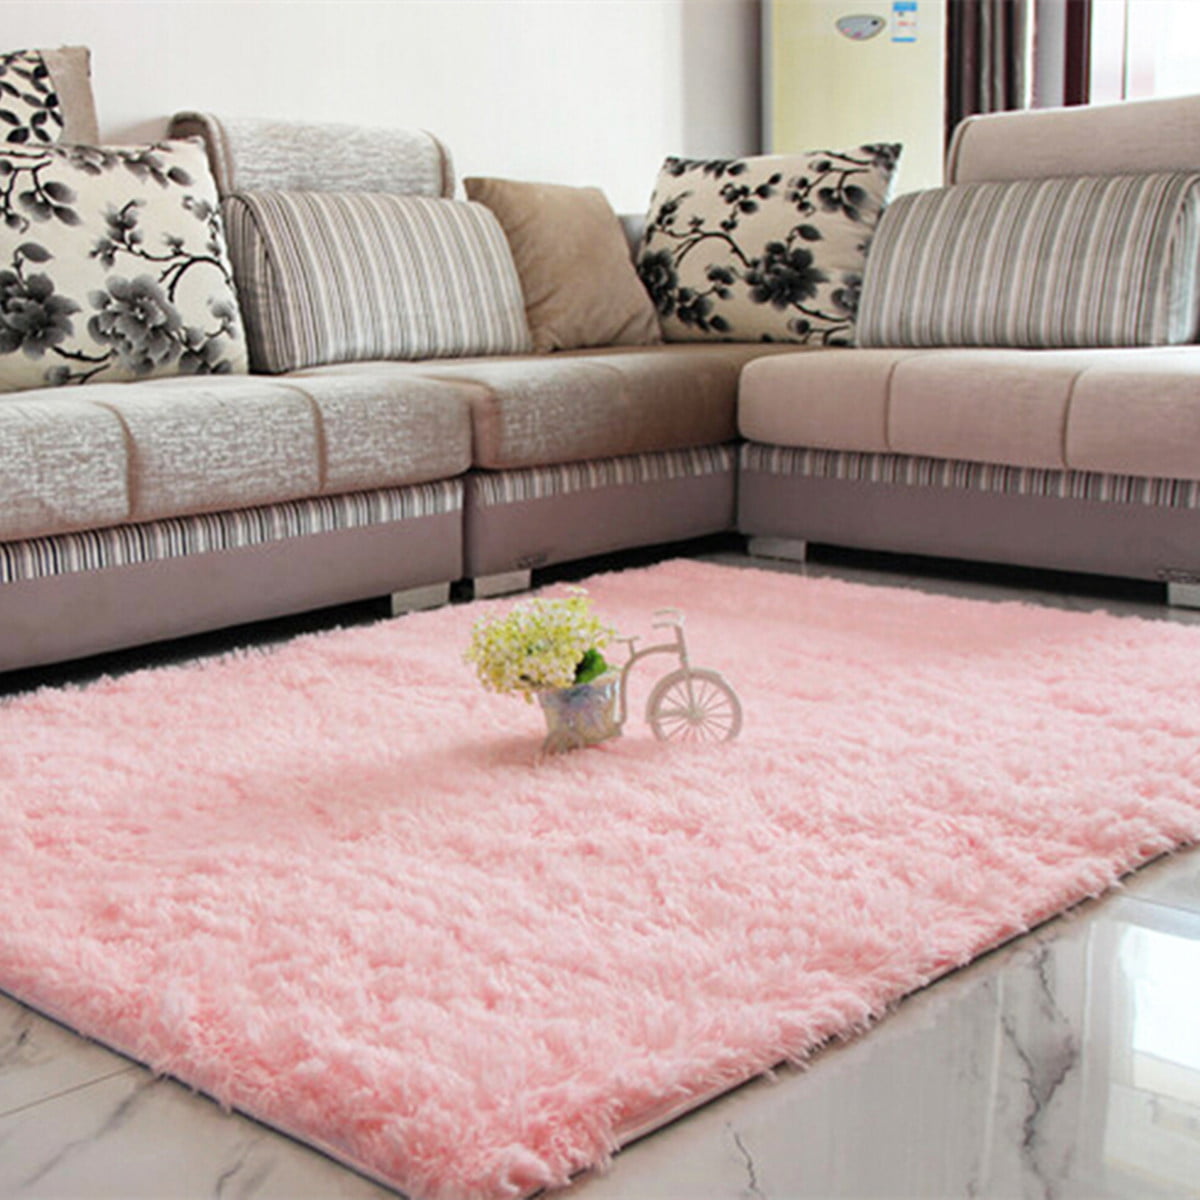 48x32 Inch Modern Soft Fluffy Floor Rug, Pink Rugs For Bedroom